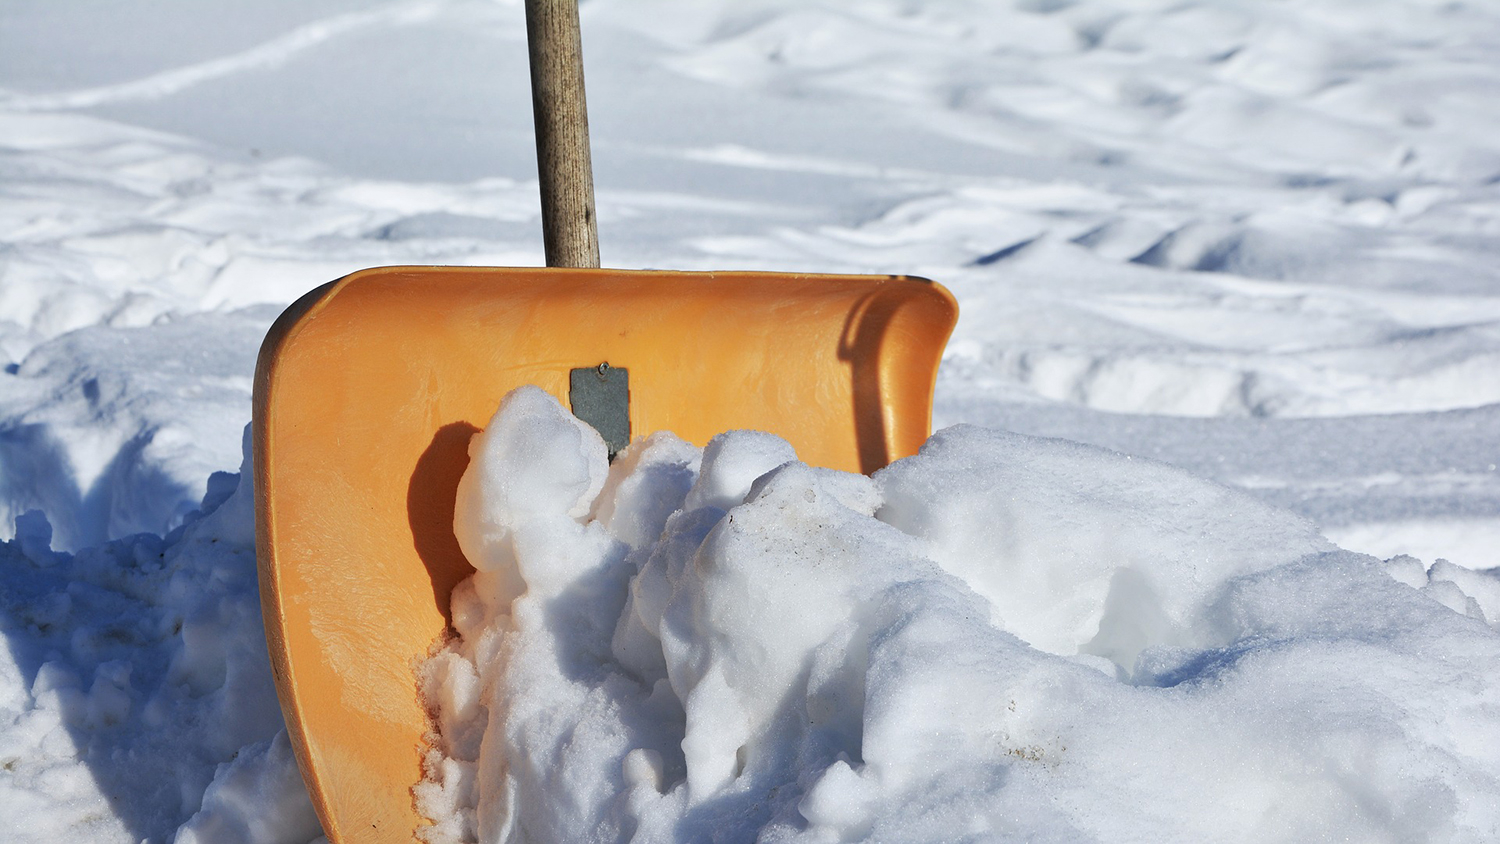 An orange snow shovel cuts through a pile of snow - New Visualization Tool Helps Weather Forecasters and Researchers More Easily Identify and Study Bands of Heavy Snow - College of Natural Resources News NC State University